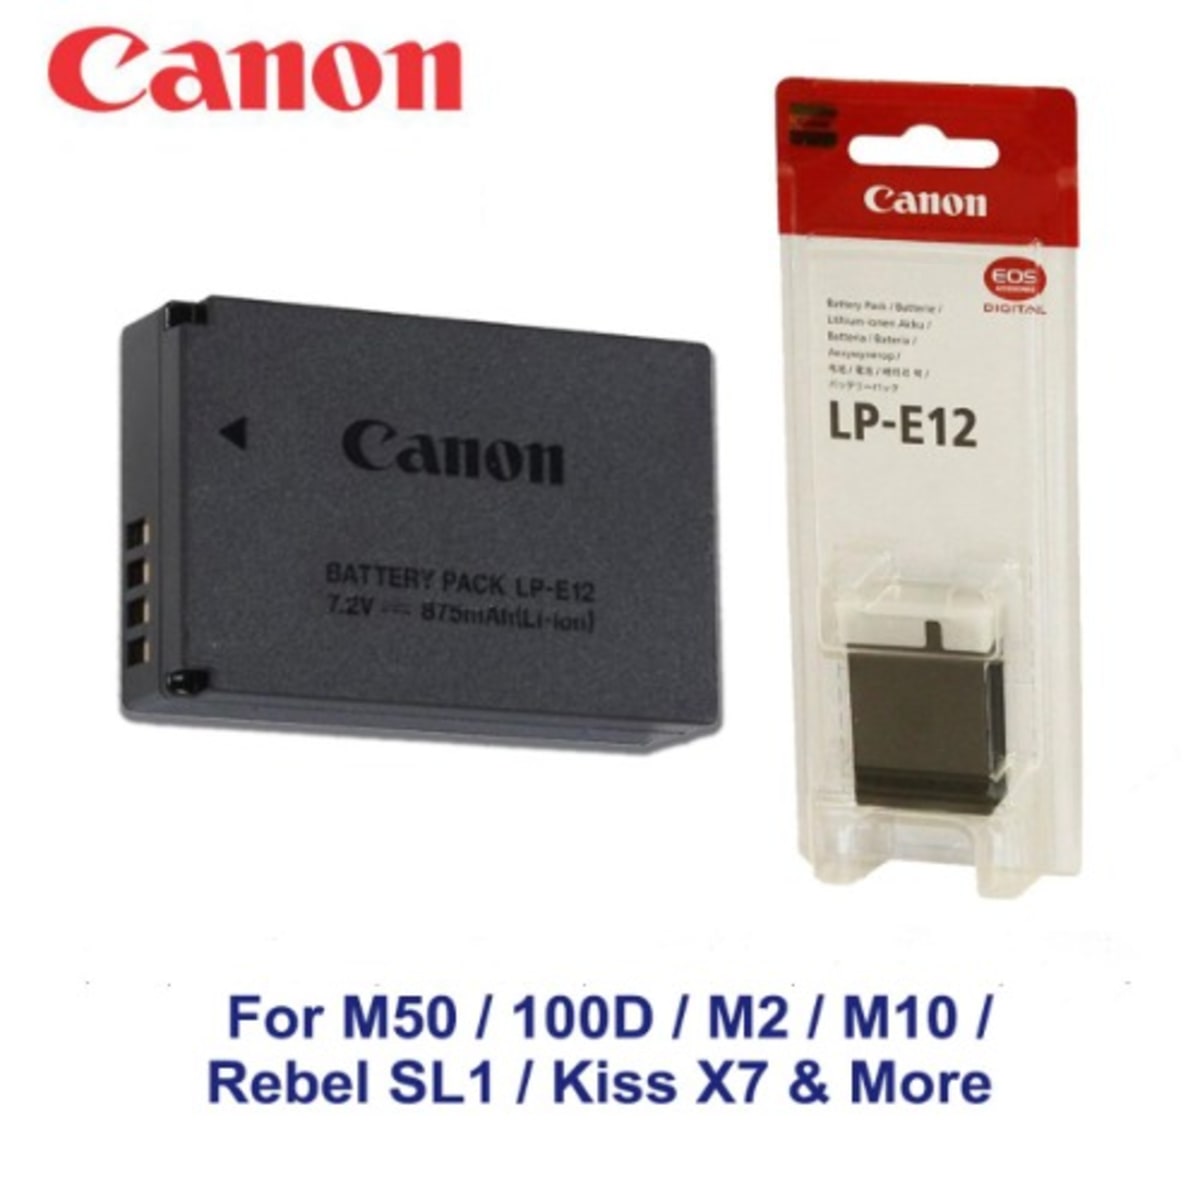 Canon LP-E12 Rechargeable battery for Canon EOS-M cameras at